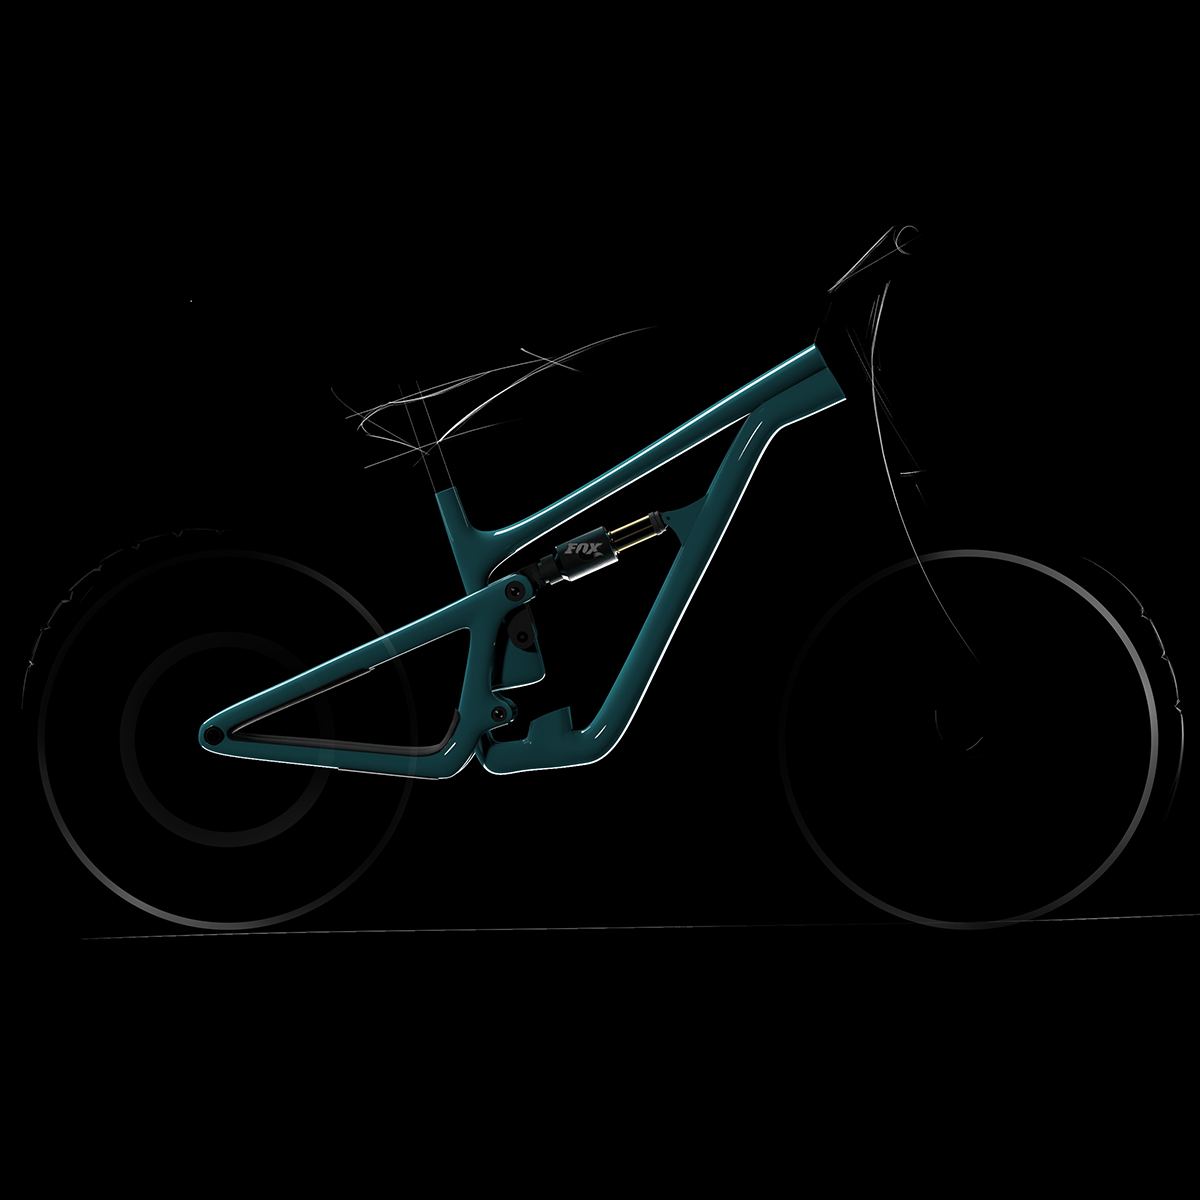 Cycle Illustration by Akhil